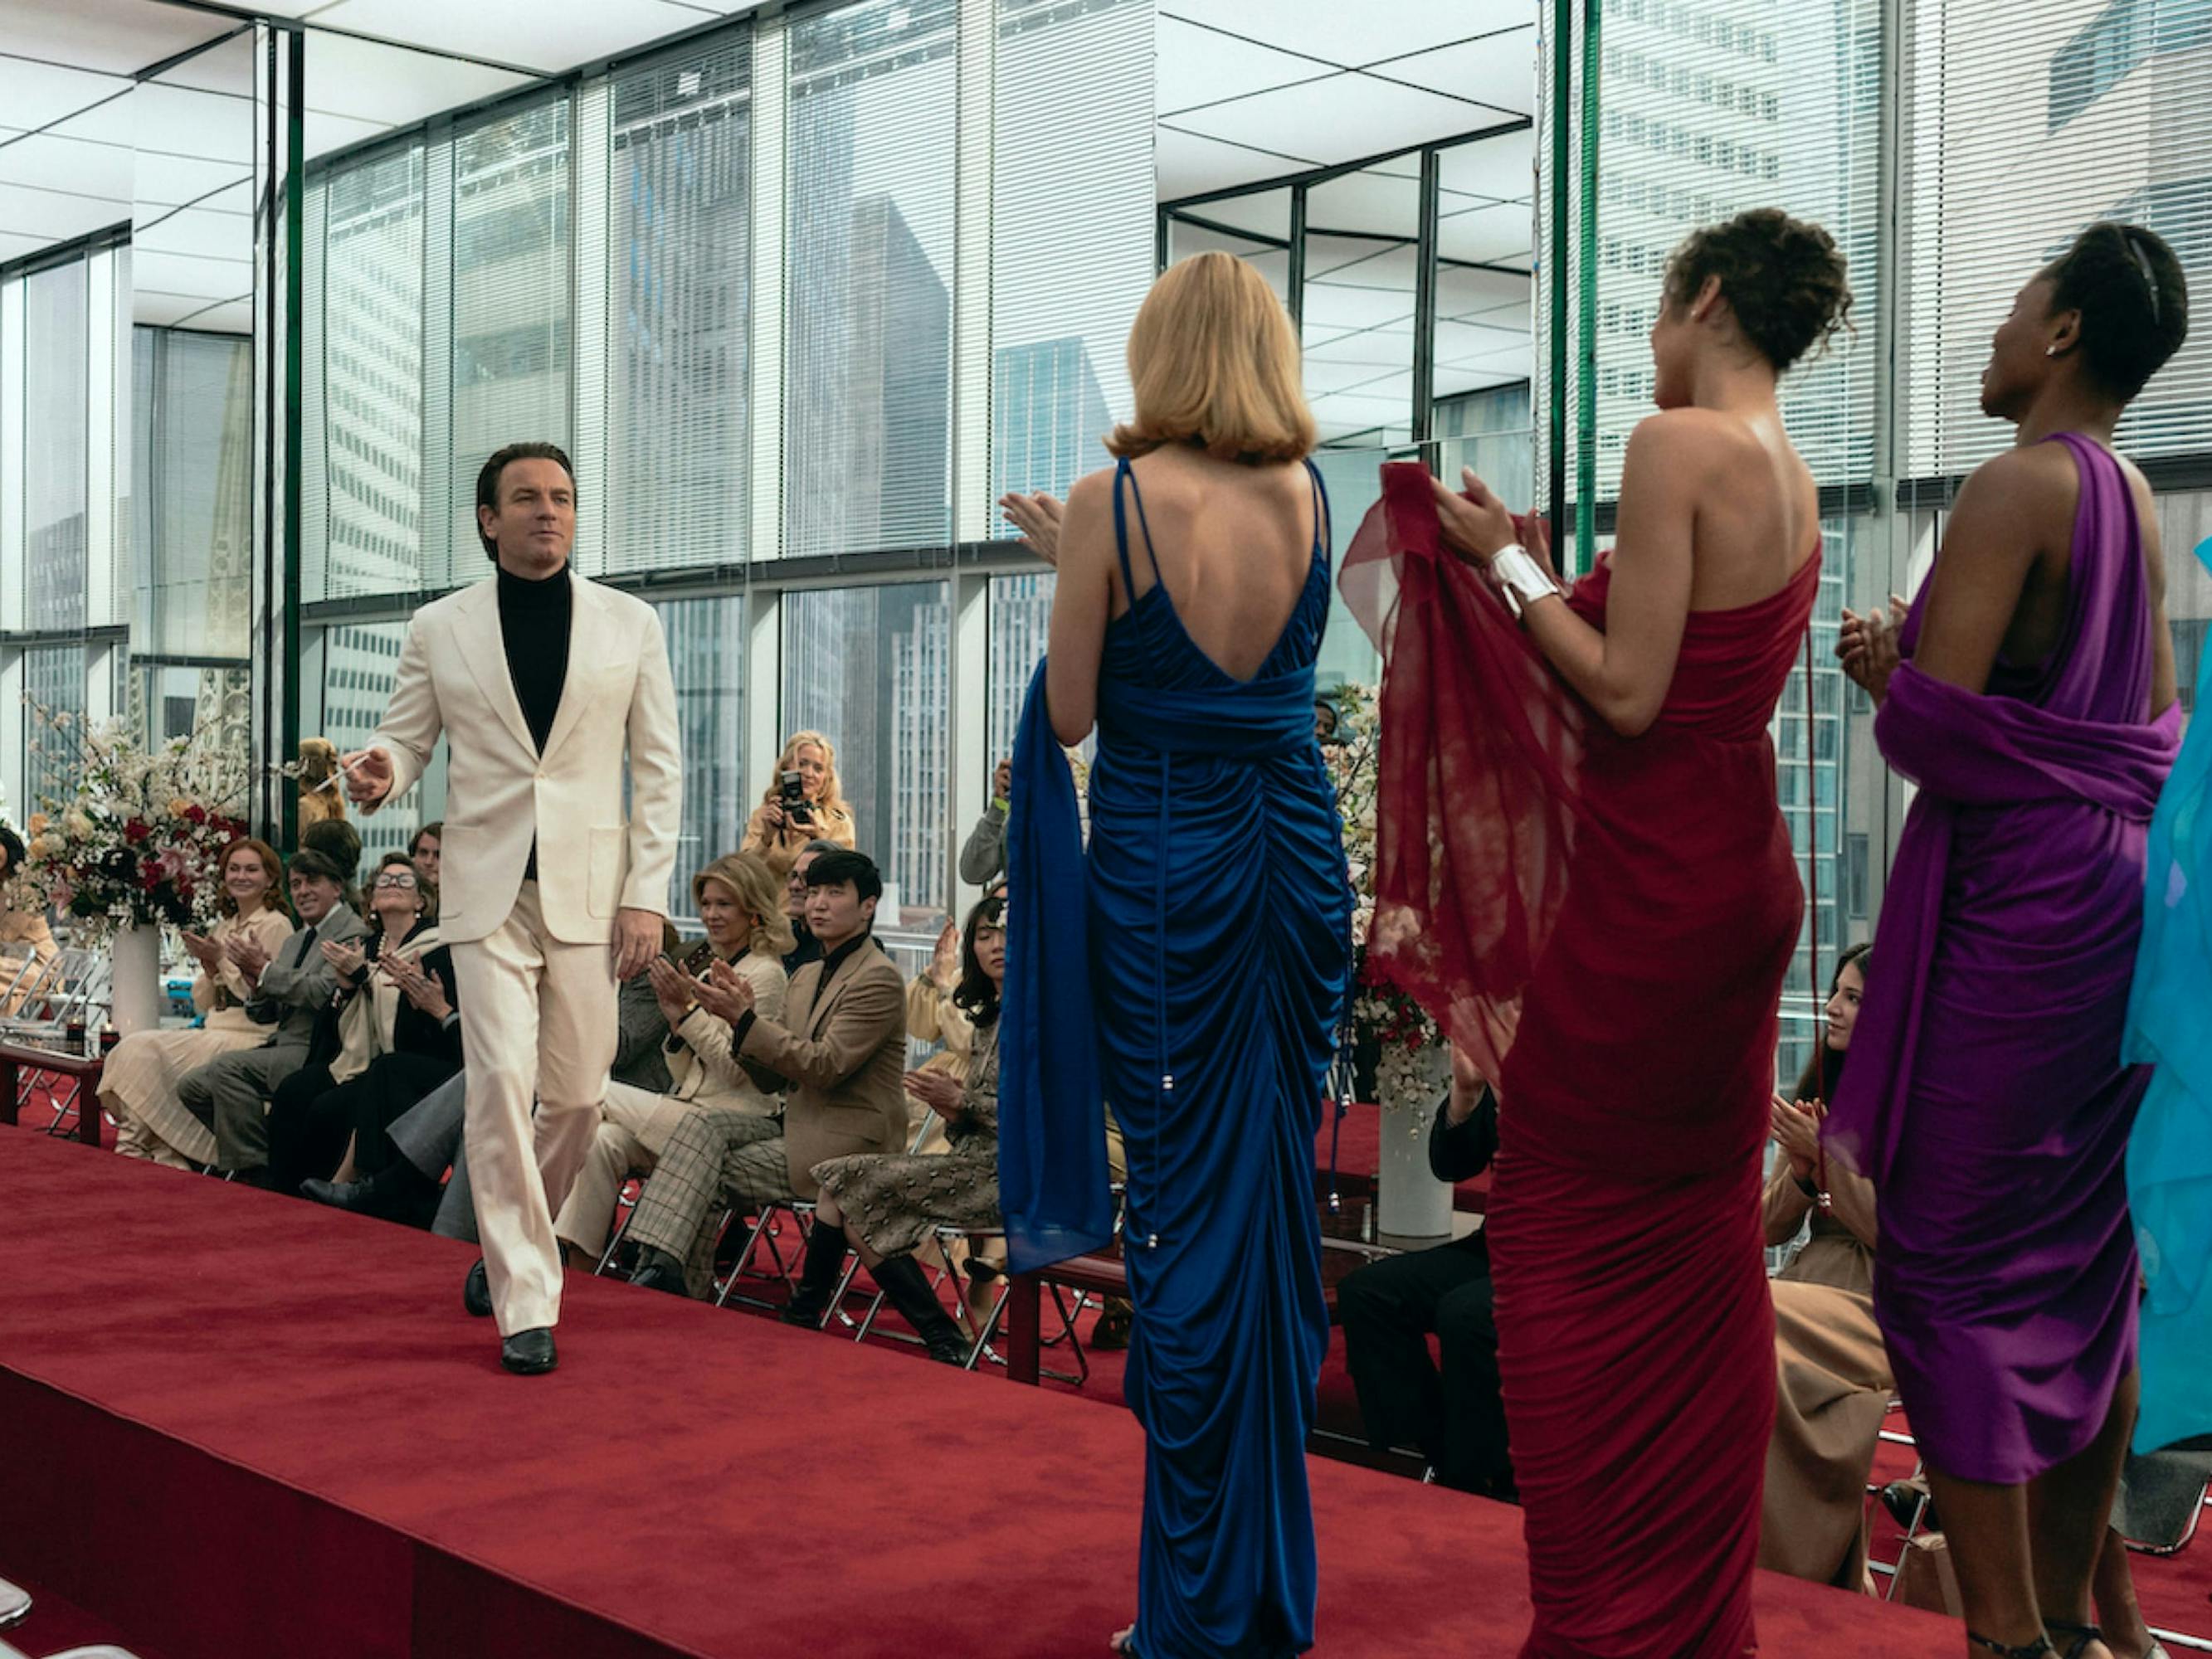 Halston (McGregor) in yet another fierce shot. He struts down a red carpeted runway in an all white suit, with a black turtleneck beneath, smoking a cigarette (he’s consistent!) Everyone alongside the runway claps, and some take pictures. He appears to walk towards four models, in blue, red, purple, and turquoise ruched dresses. The room is bordered by four glass walls that show buildings around them. 